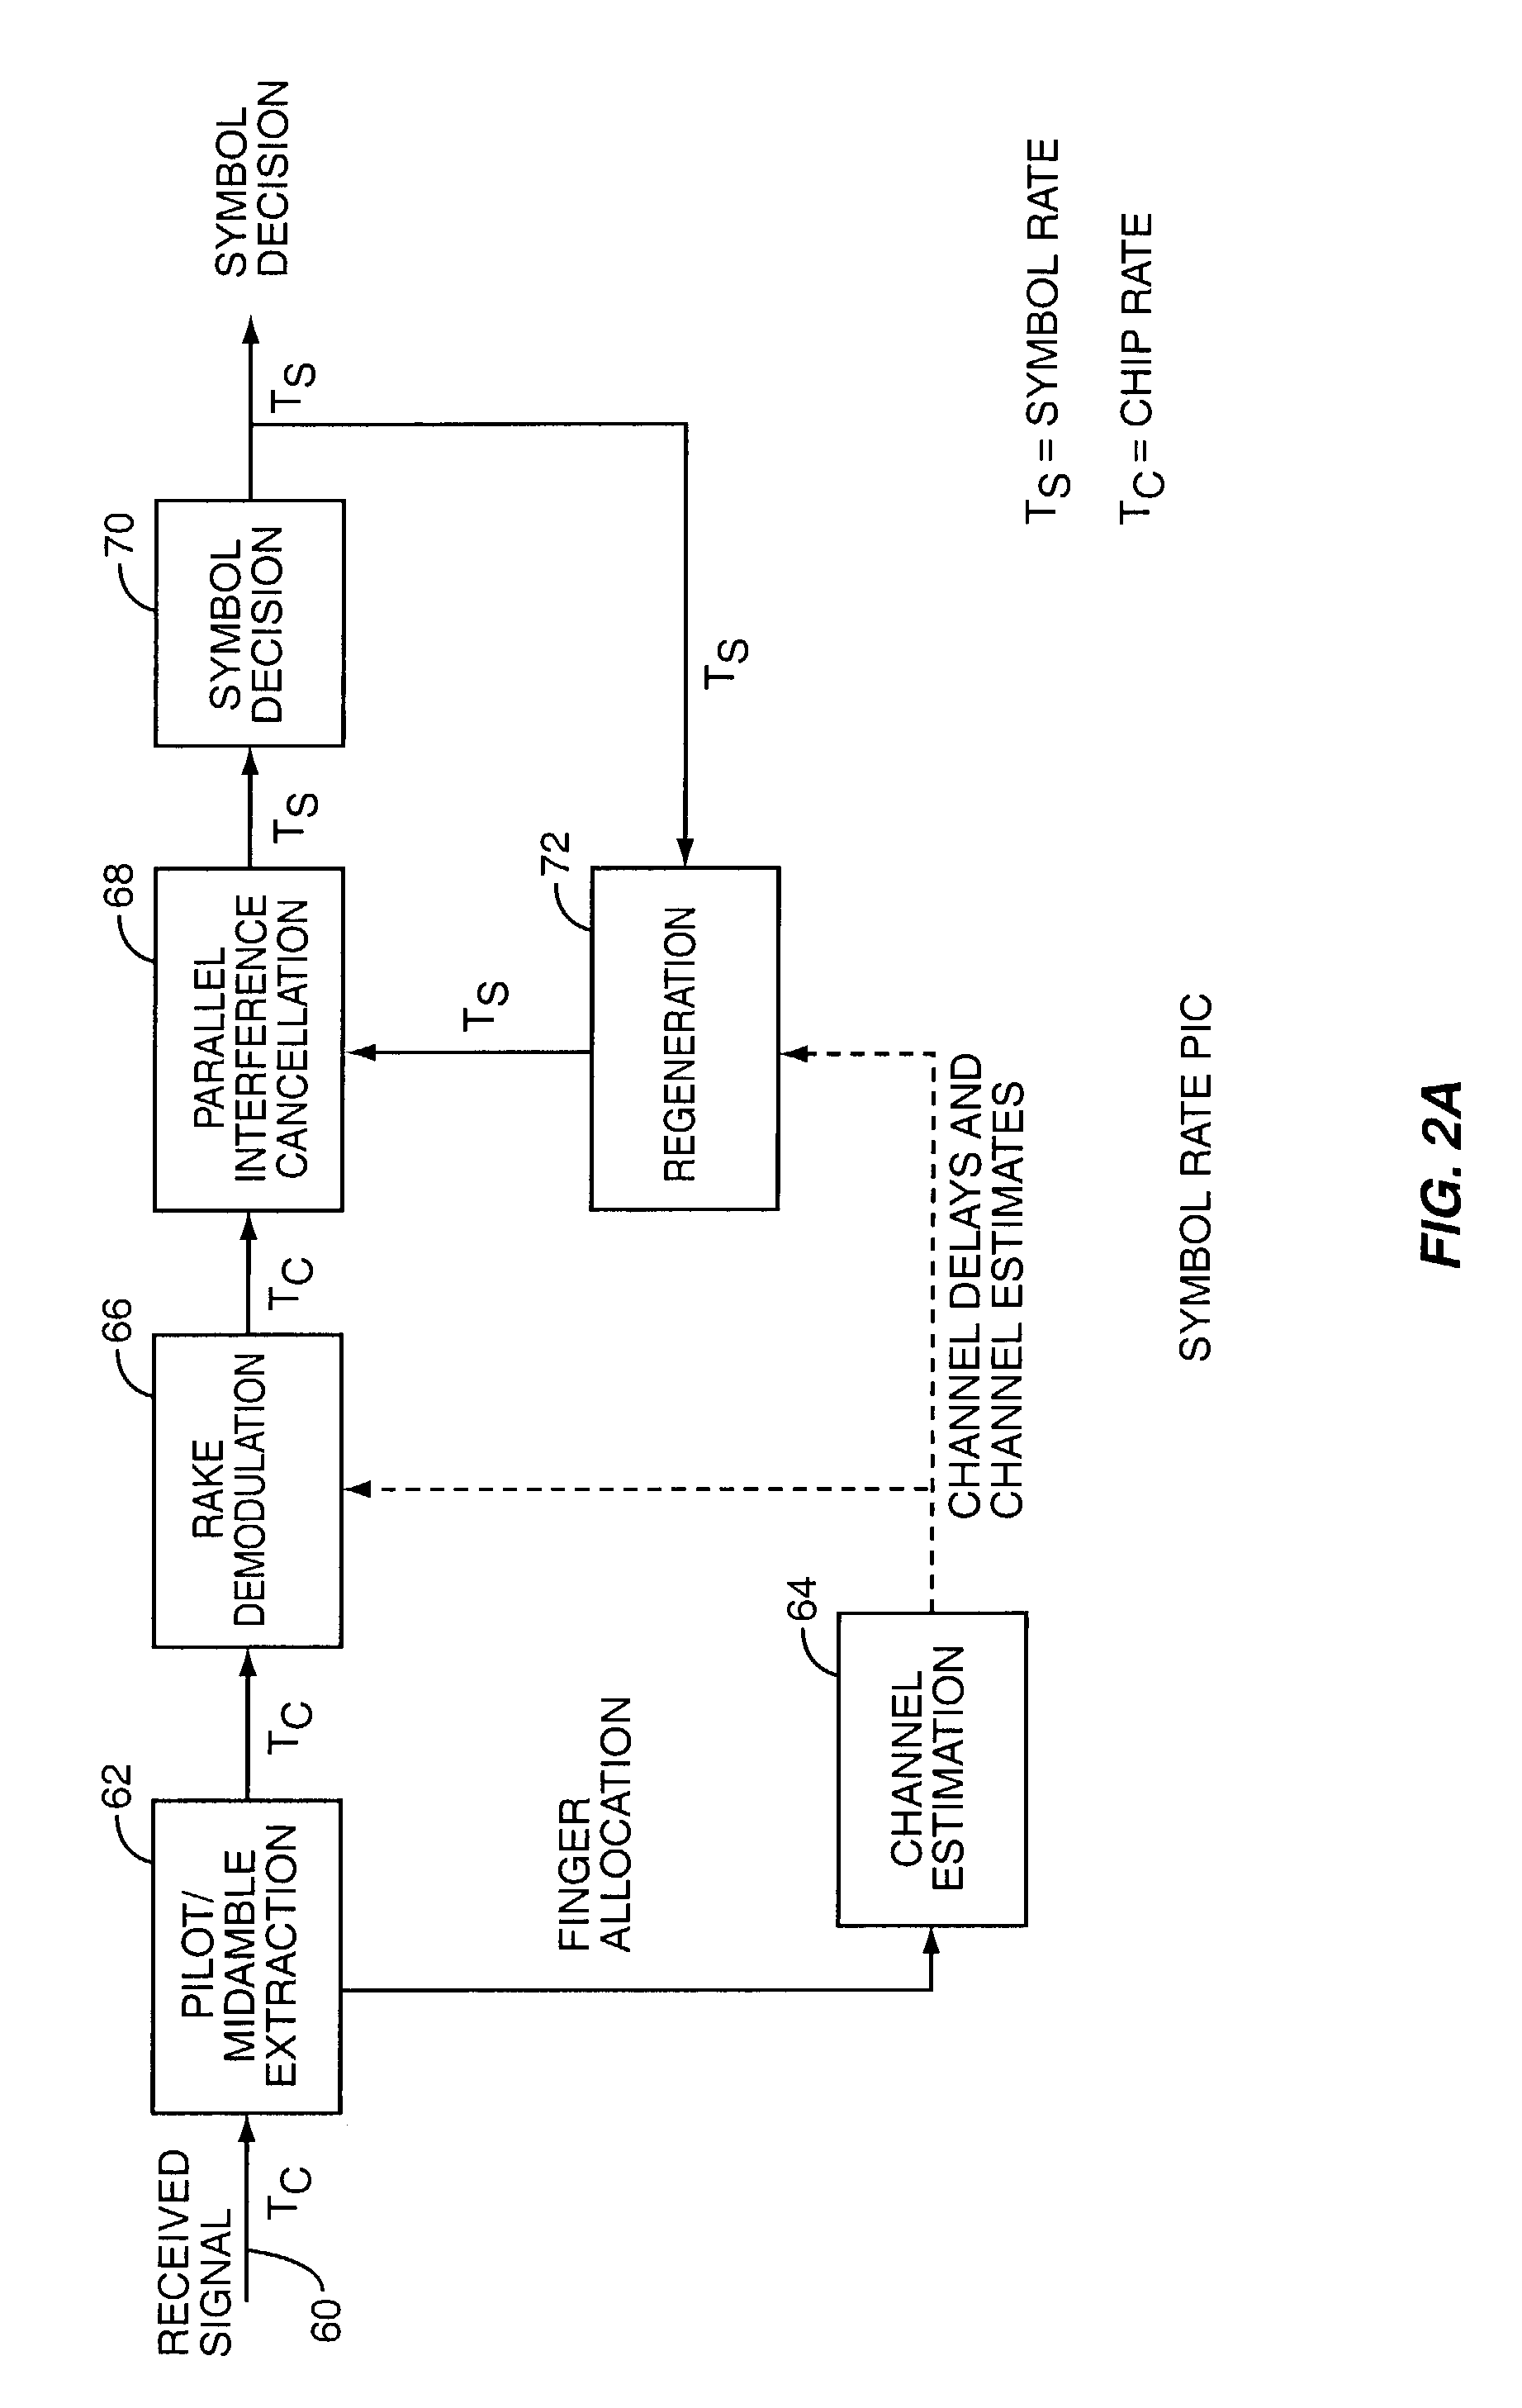 Low complexity interference cancellation